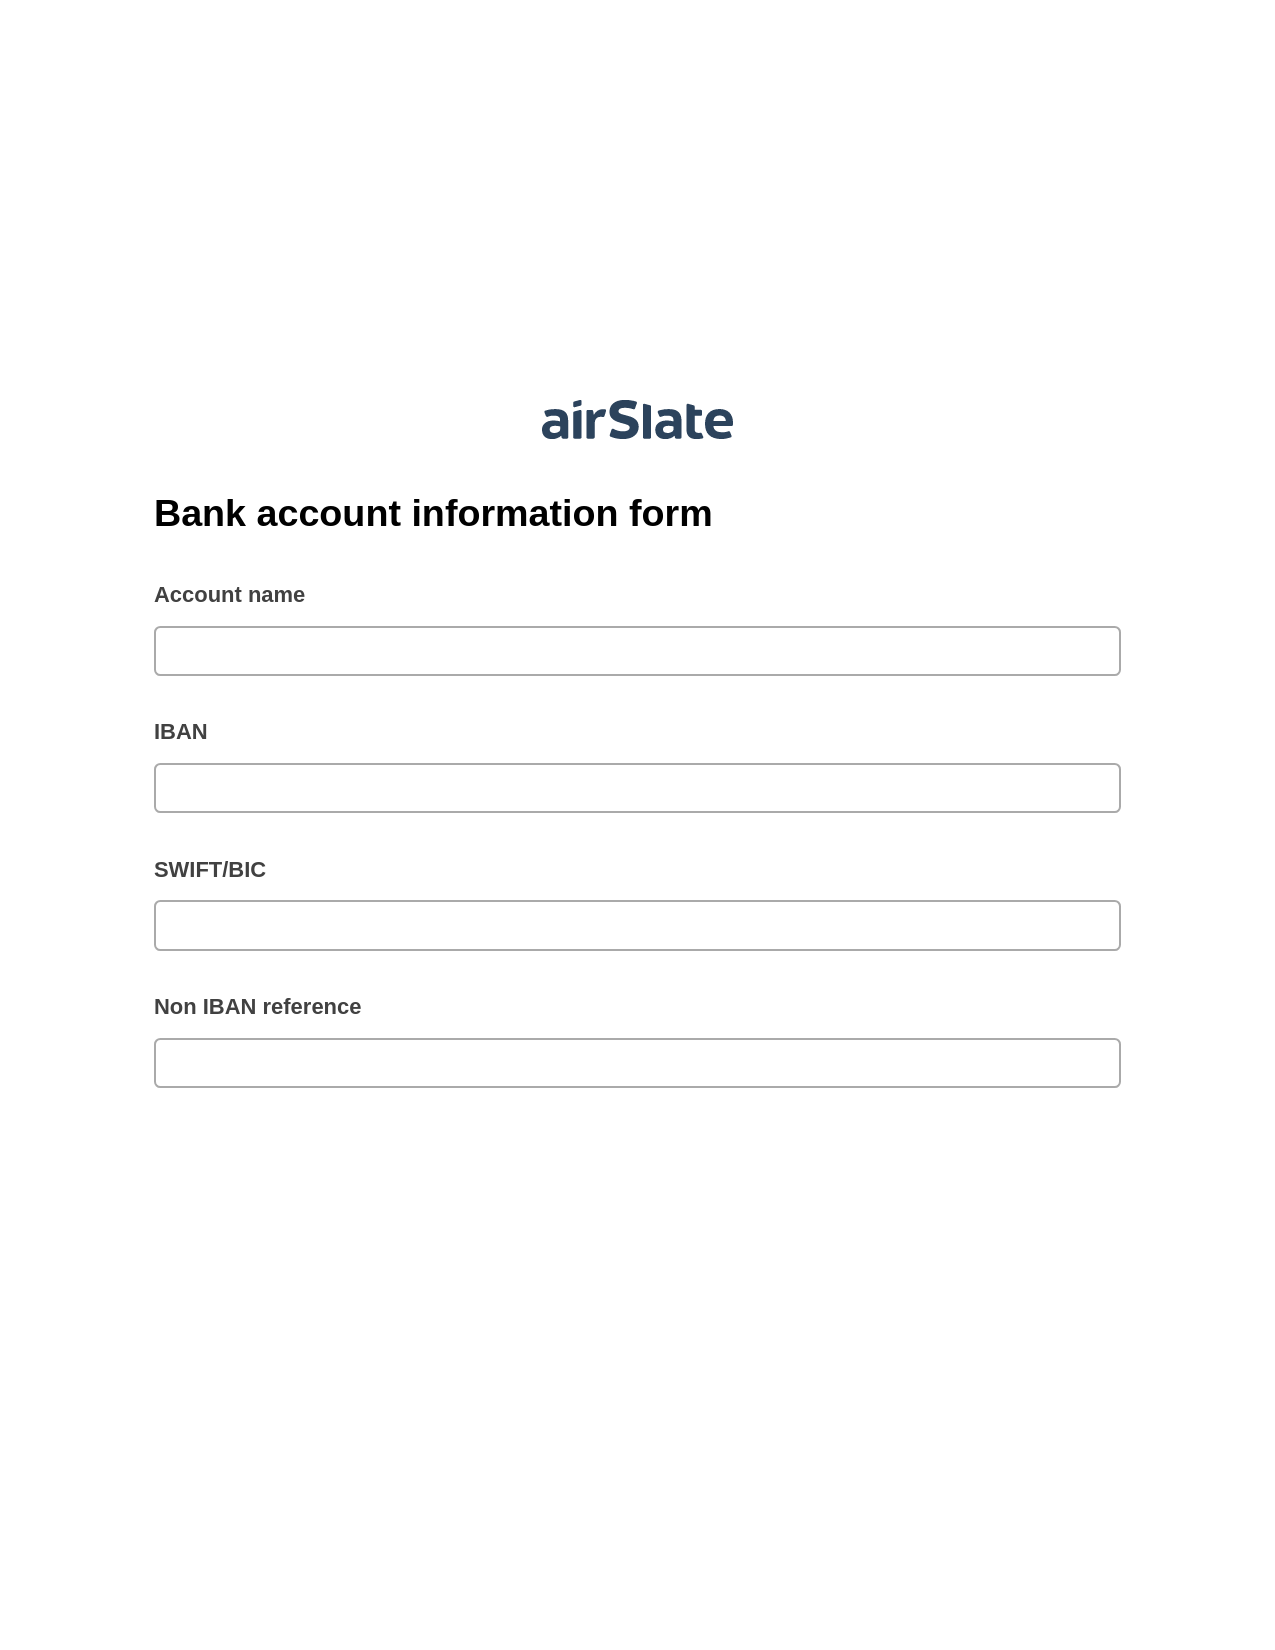 Bank account information form Pre-fill Slate from MS Dynamics 365 Records Bot, Webhook Bot, Export to Google Sheet Bot